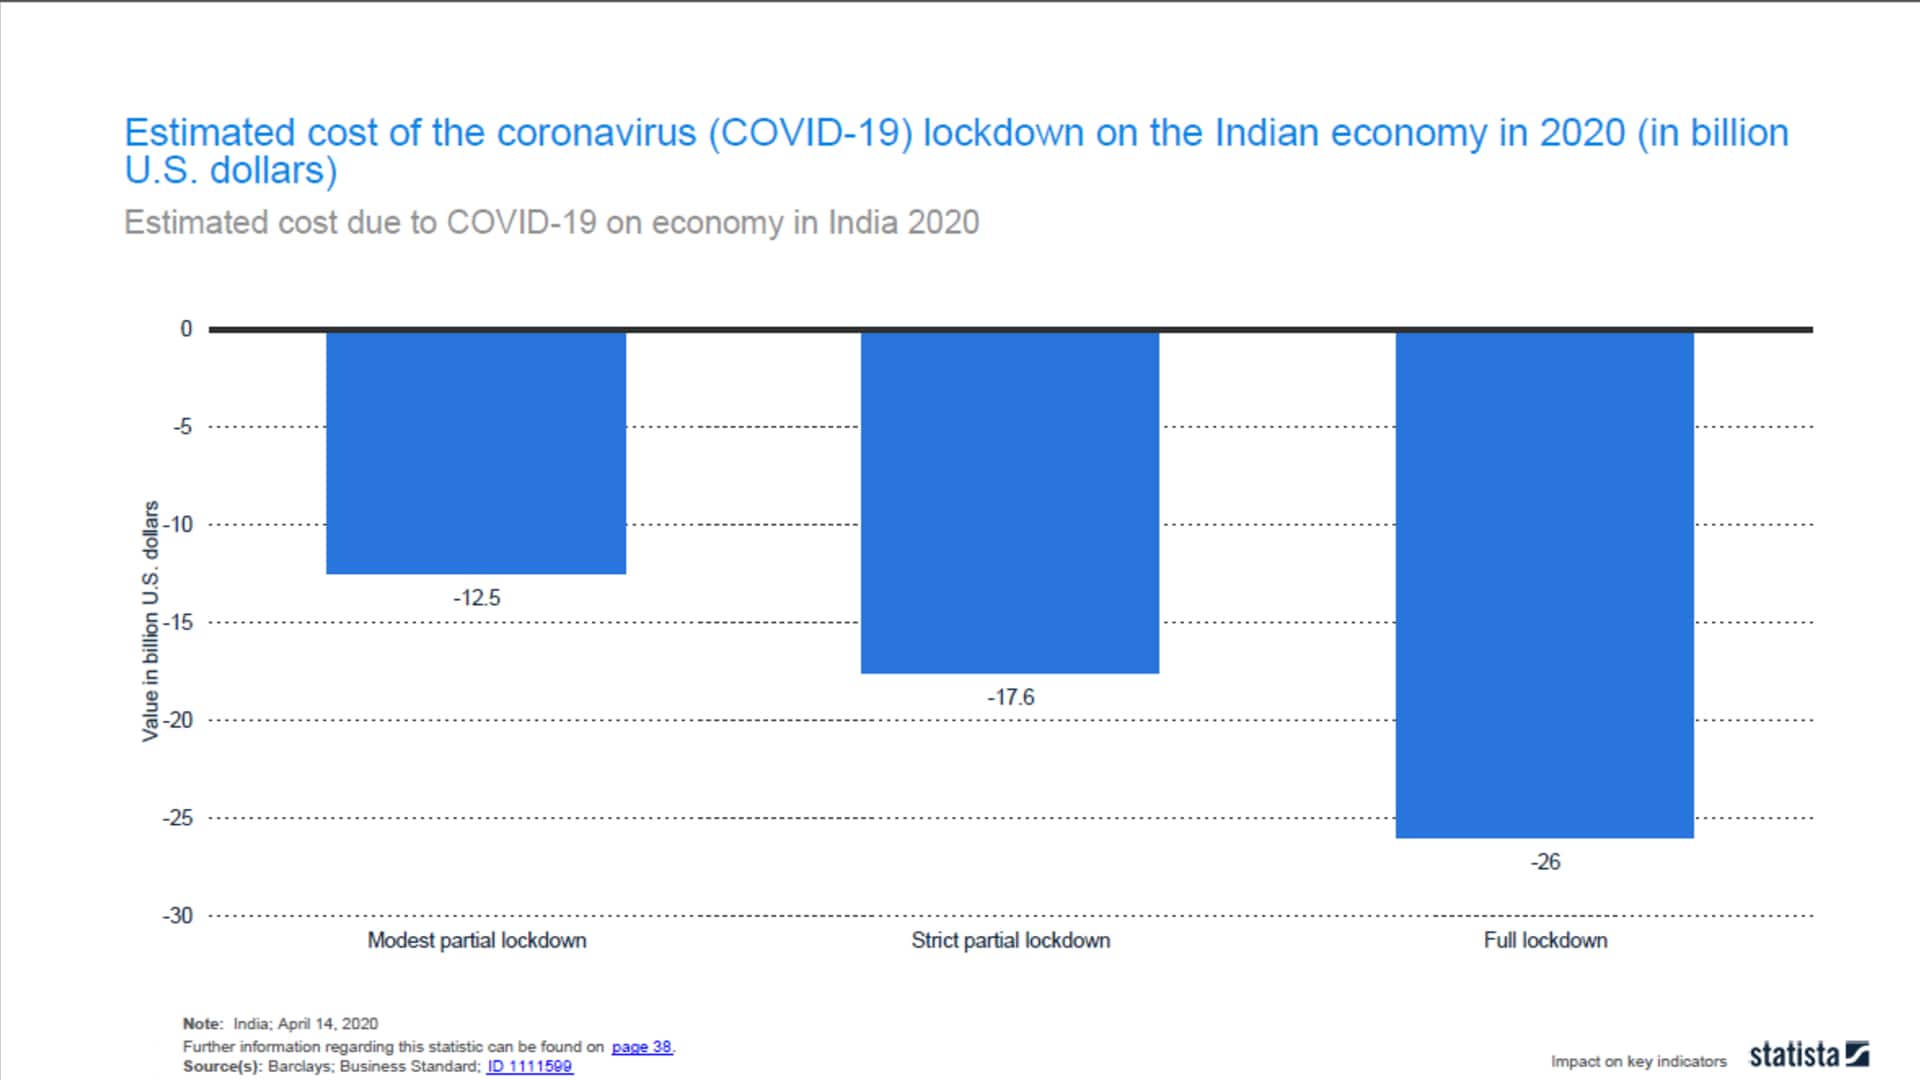 https://images.moneycontrol.com/static-mcnews/2020/05/2.-Estimated-cost-of-the-coronavirus-COVID-19-lockdown-on-the-Indian-economy-in-2020-in-billion-U.S.-dollars.jpg